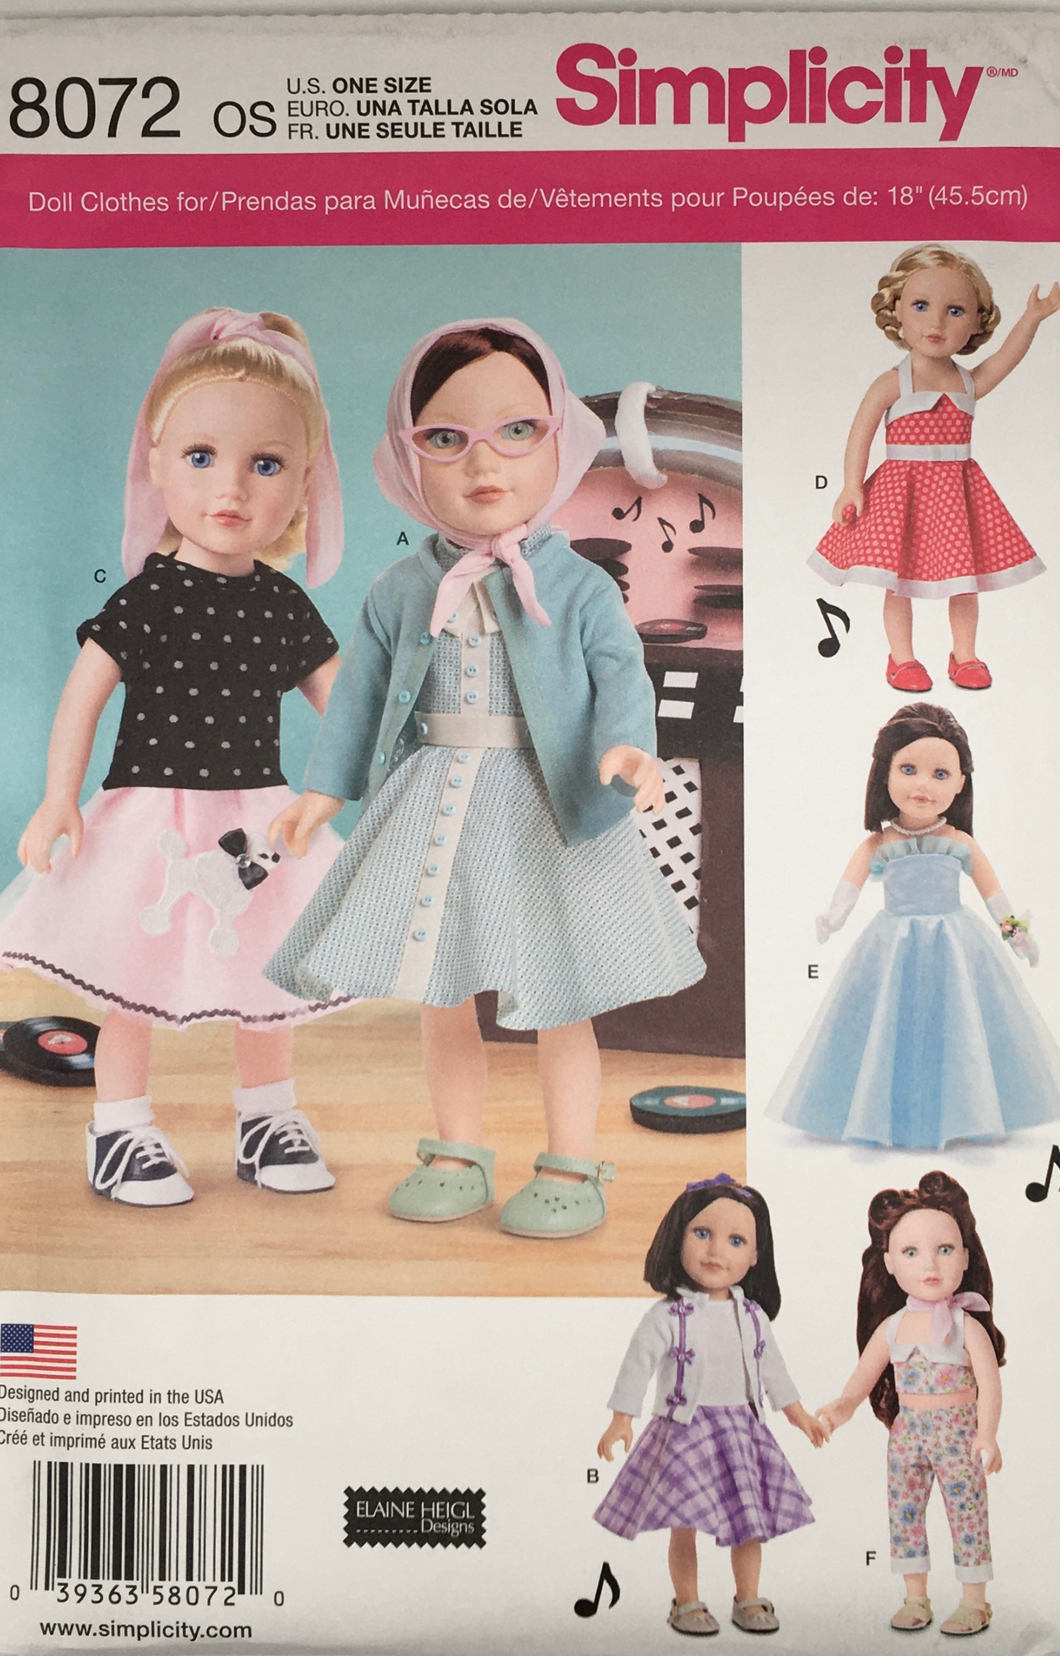 2016 Sewing Pattern: Simplicity 8072